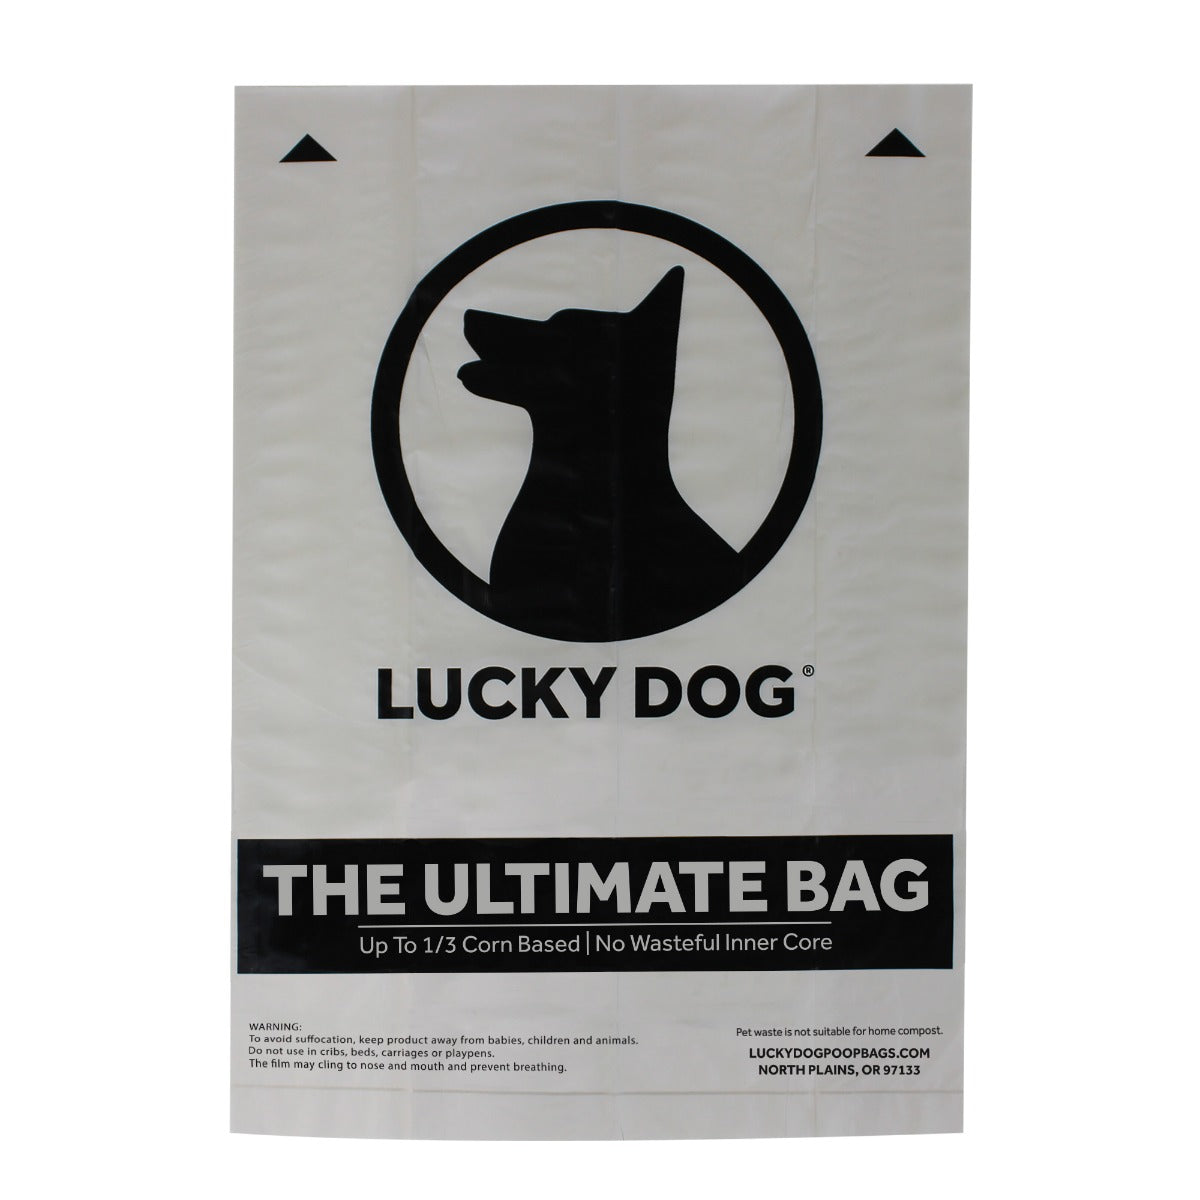 Amazon Brand - Umi Dog Poo Bags with tie Handles, Biodegradable Dog Poop  Bags, Certified Compostable, Extra Thick and Leak-Proof, Unscented, 13 x 40  cm, 120 bags : Amazon.co.uk: Pet Supplies